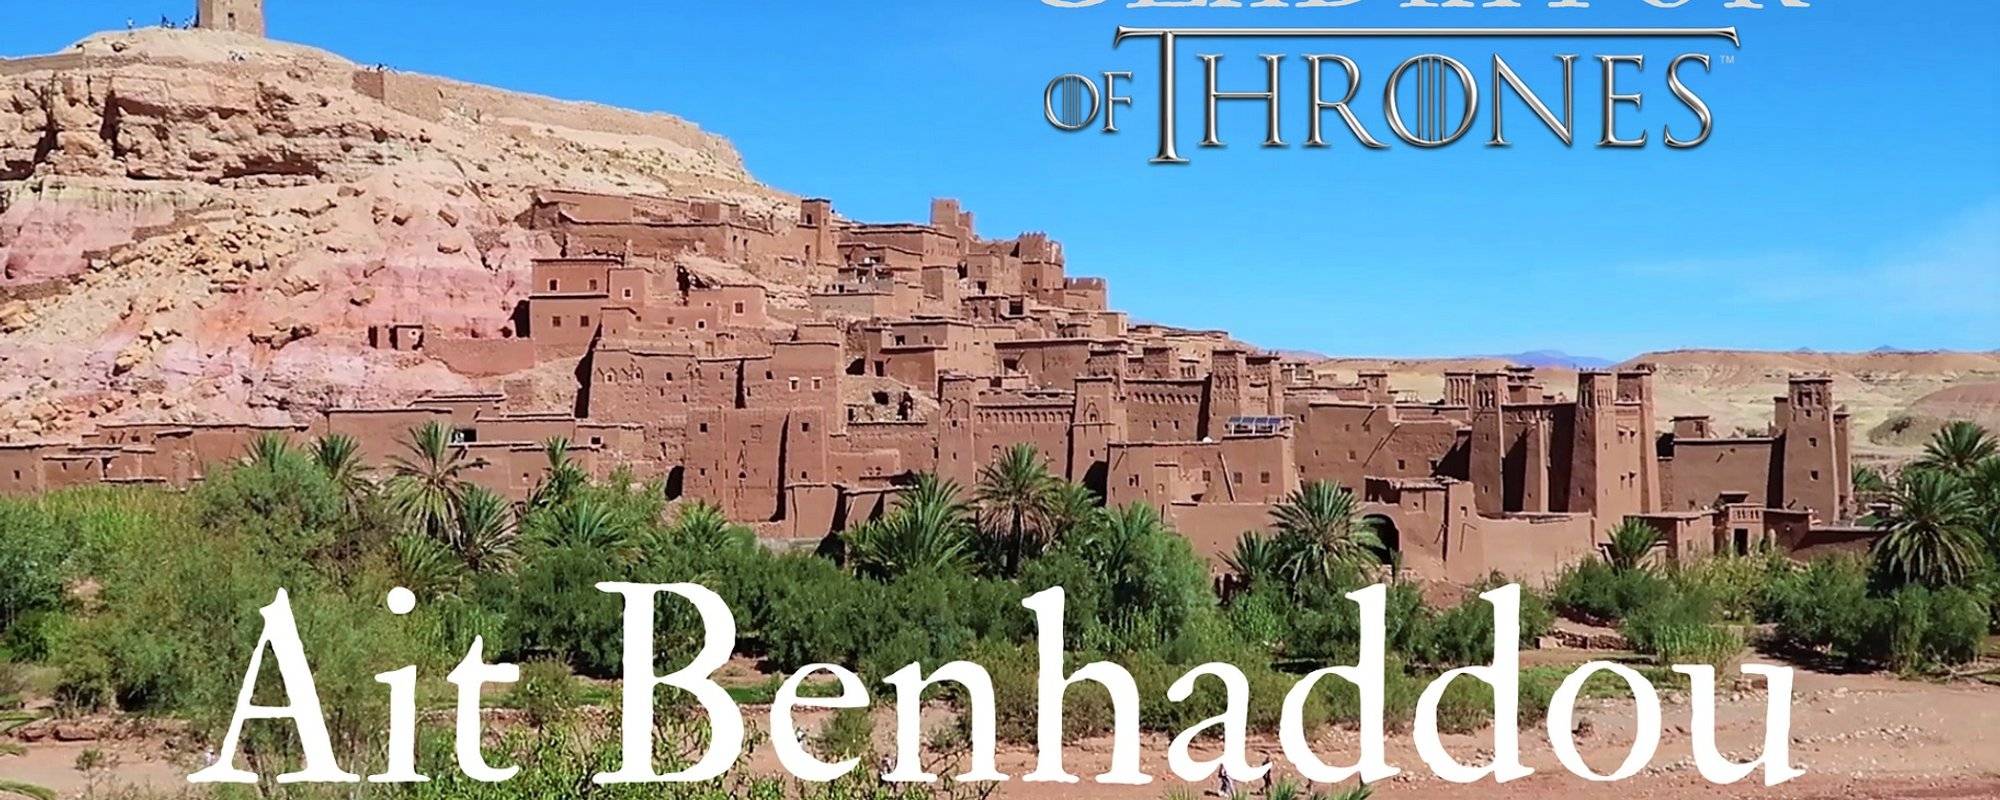 Traveling to the Sahara, Day 1 - Ait Ben-Haddou, Morocco (DLive video)